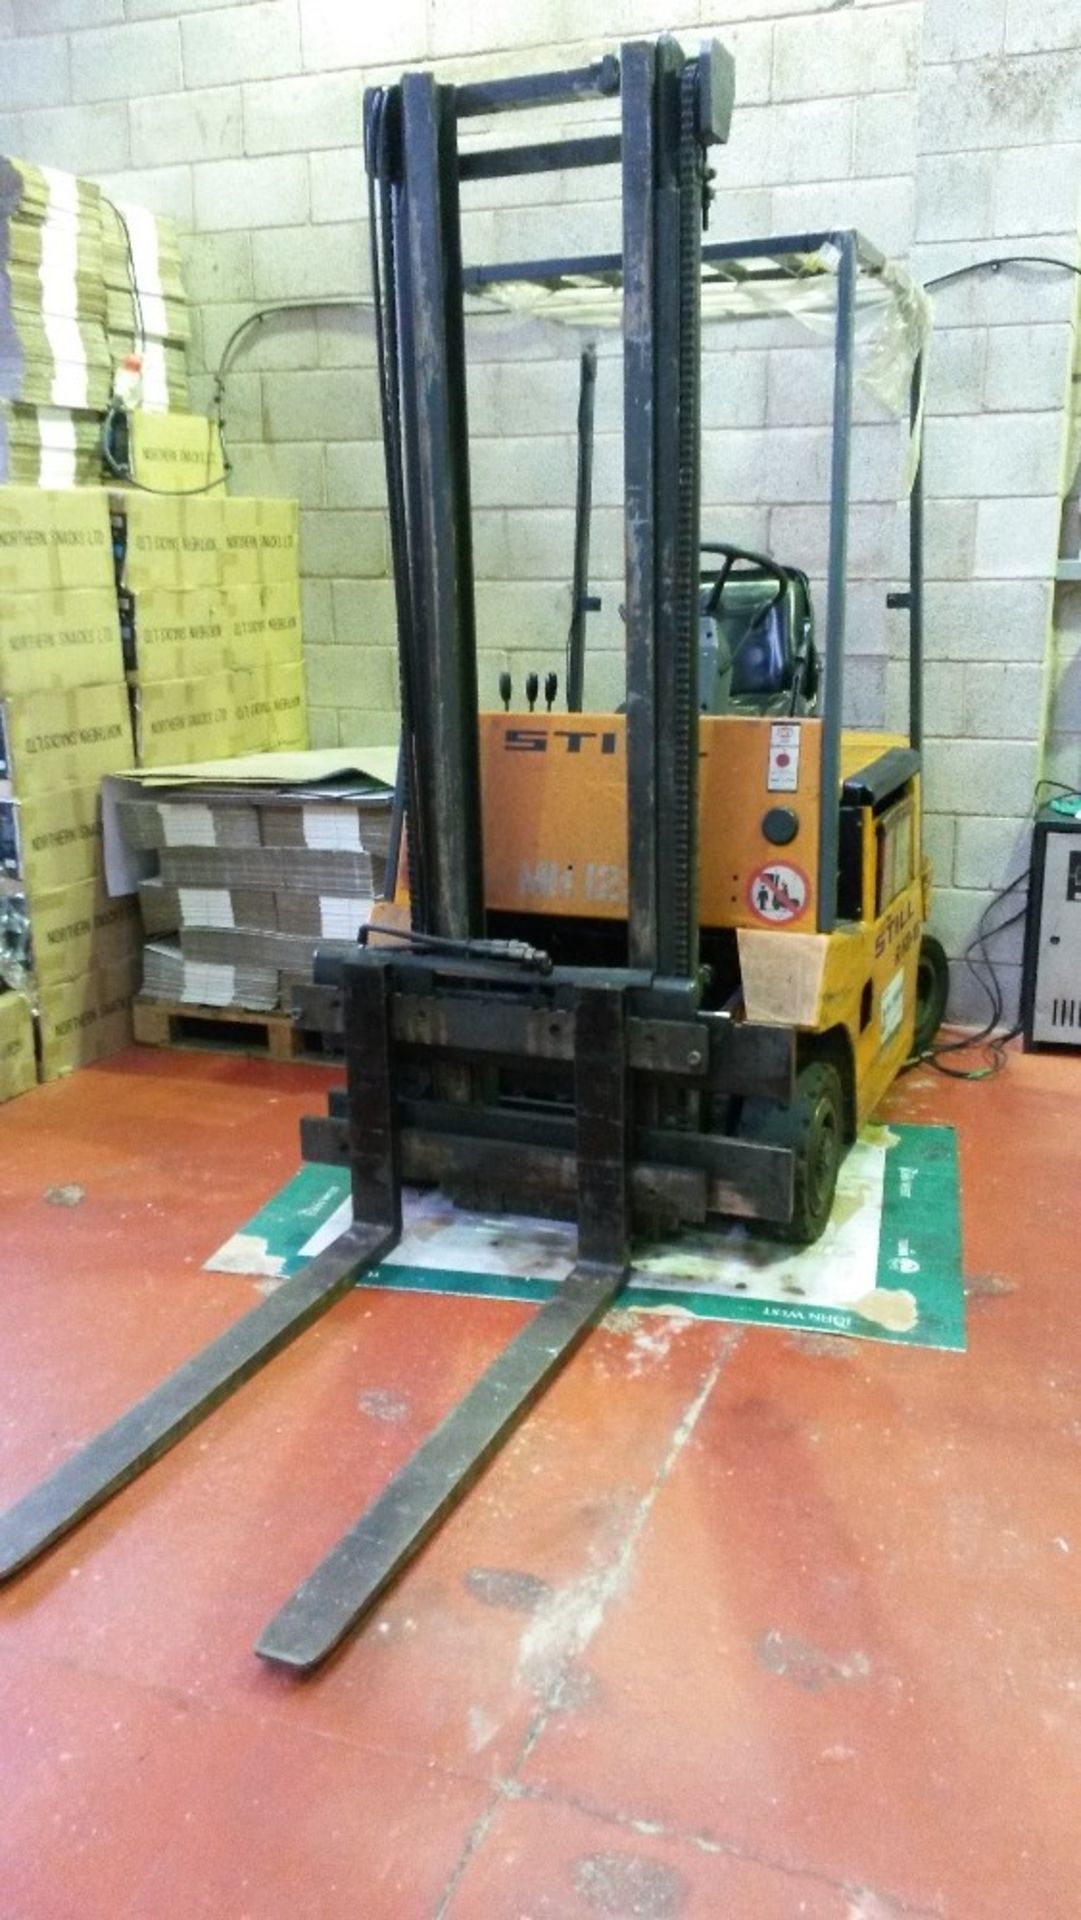 Still R60-16 Electric Forklift truck in working order